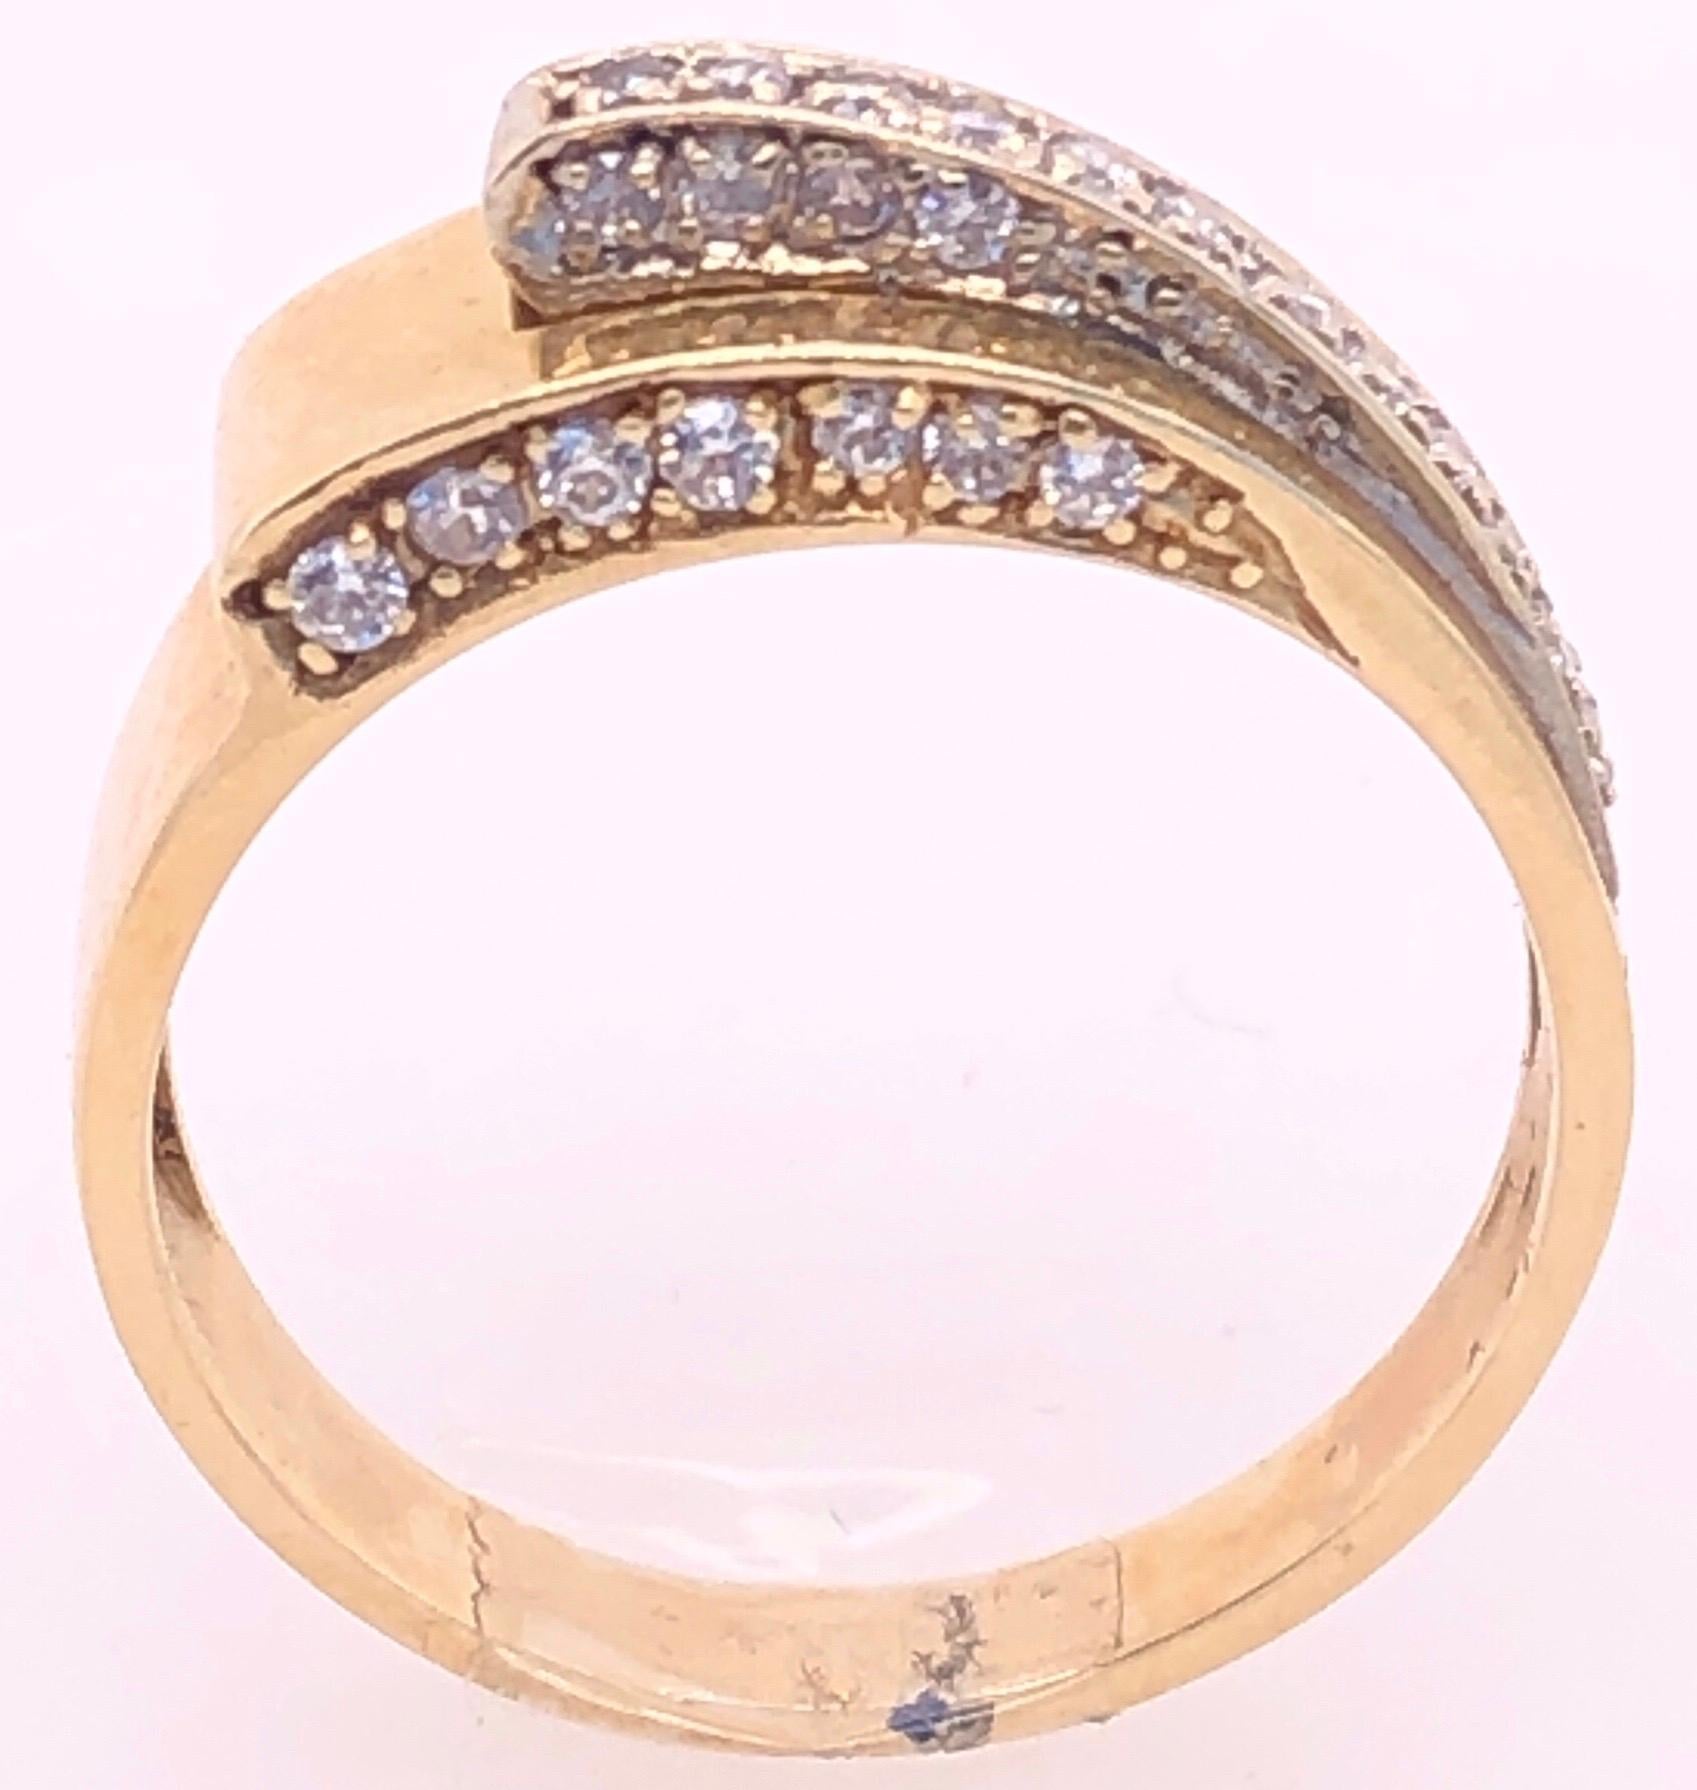 14 Karat Yellow and White Gold And Diamond Contemporary Ring Size 8.
40 round diamonds with 1.25 total  diamond weight.
4.78 grams total weight.